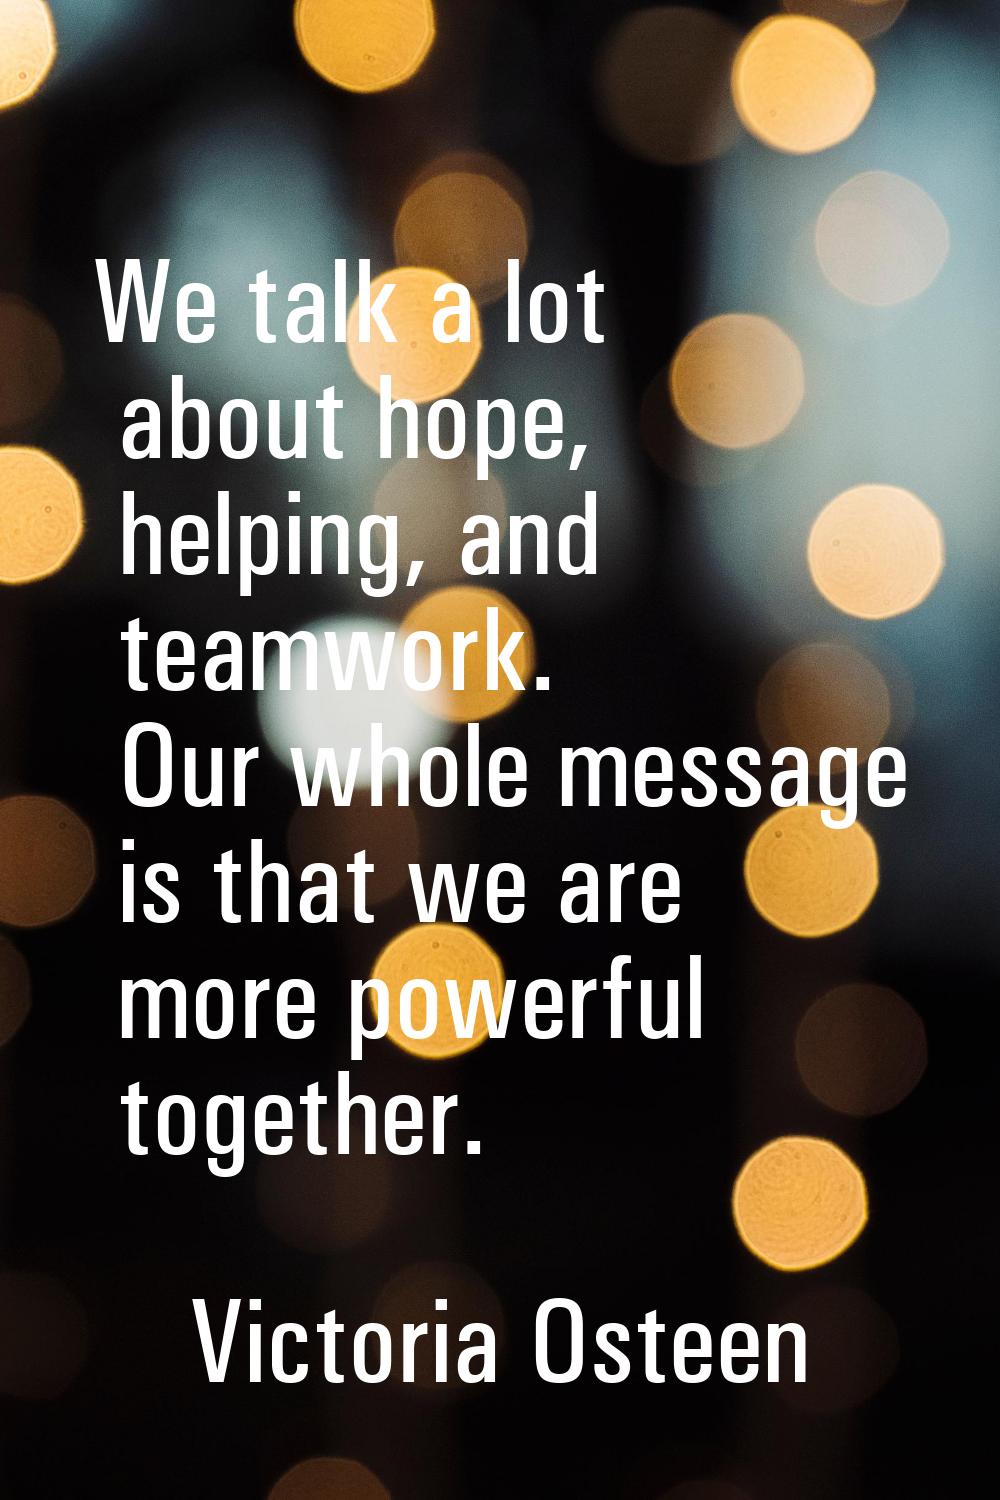 We talk a lot about hope, helping, and teamwork. Our whole message is that we are more powerful tog